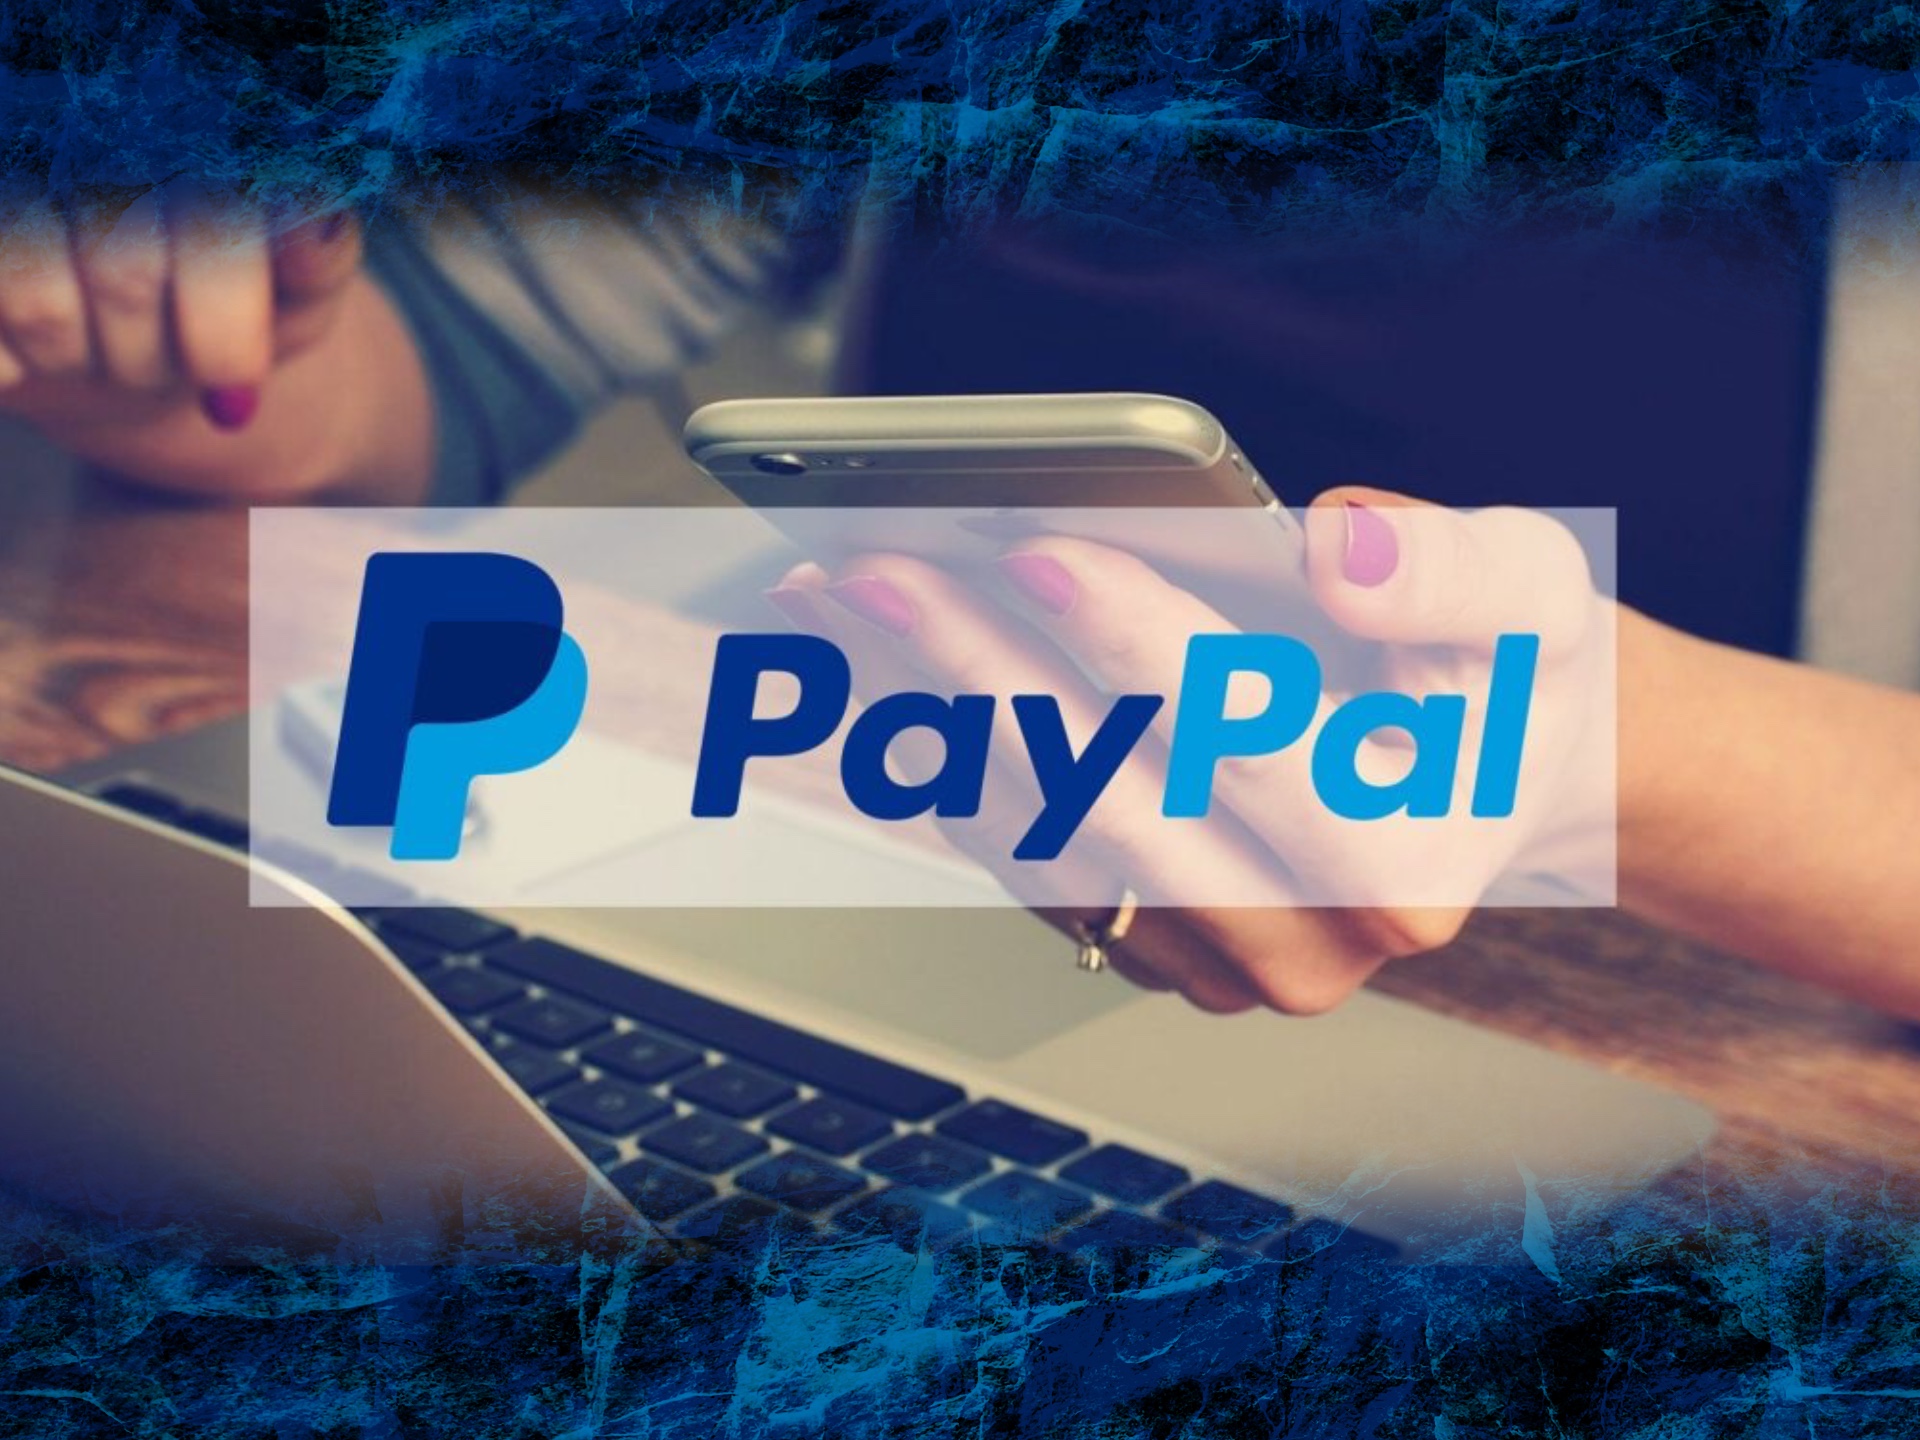 Paypal lets you make money transfers instantly.